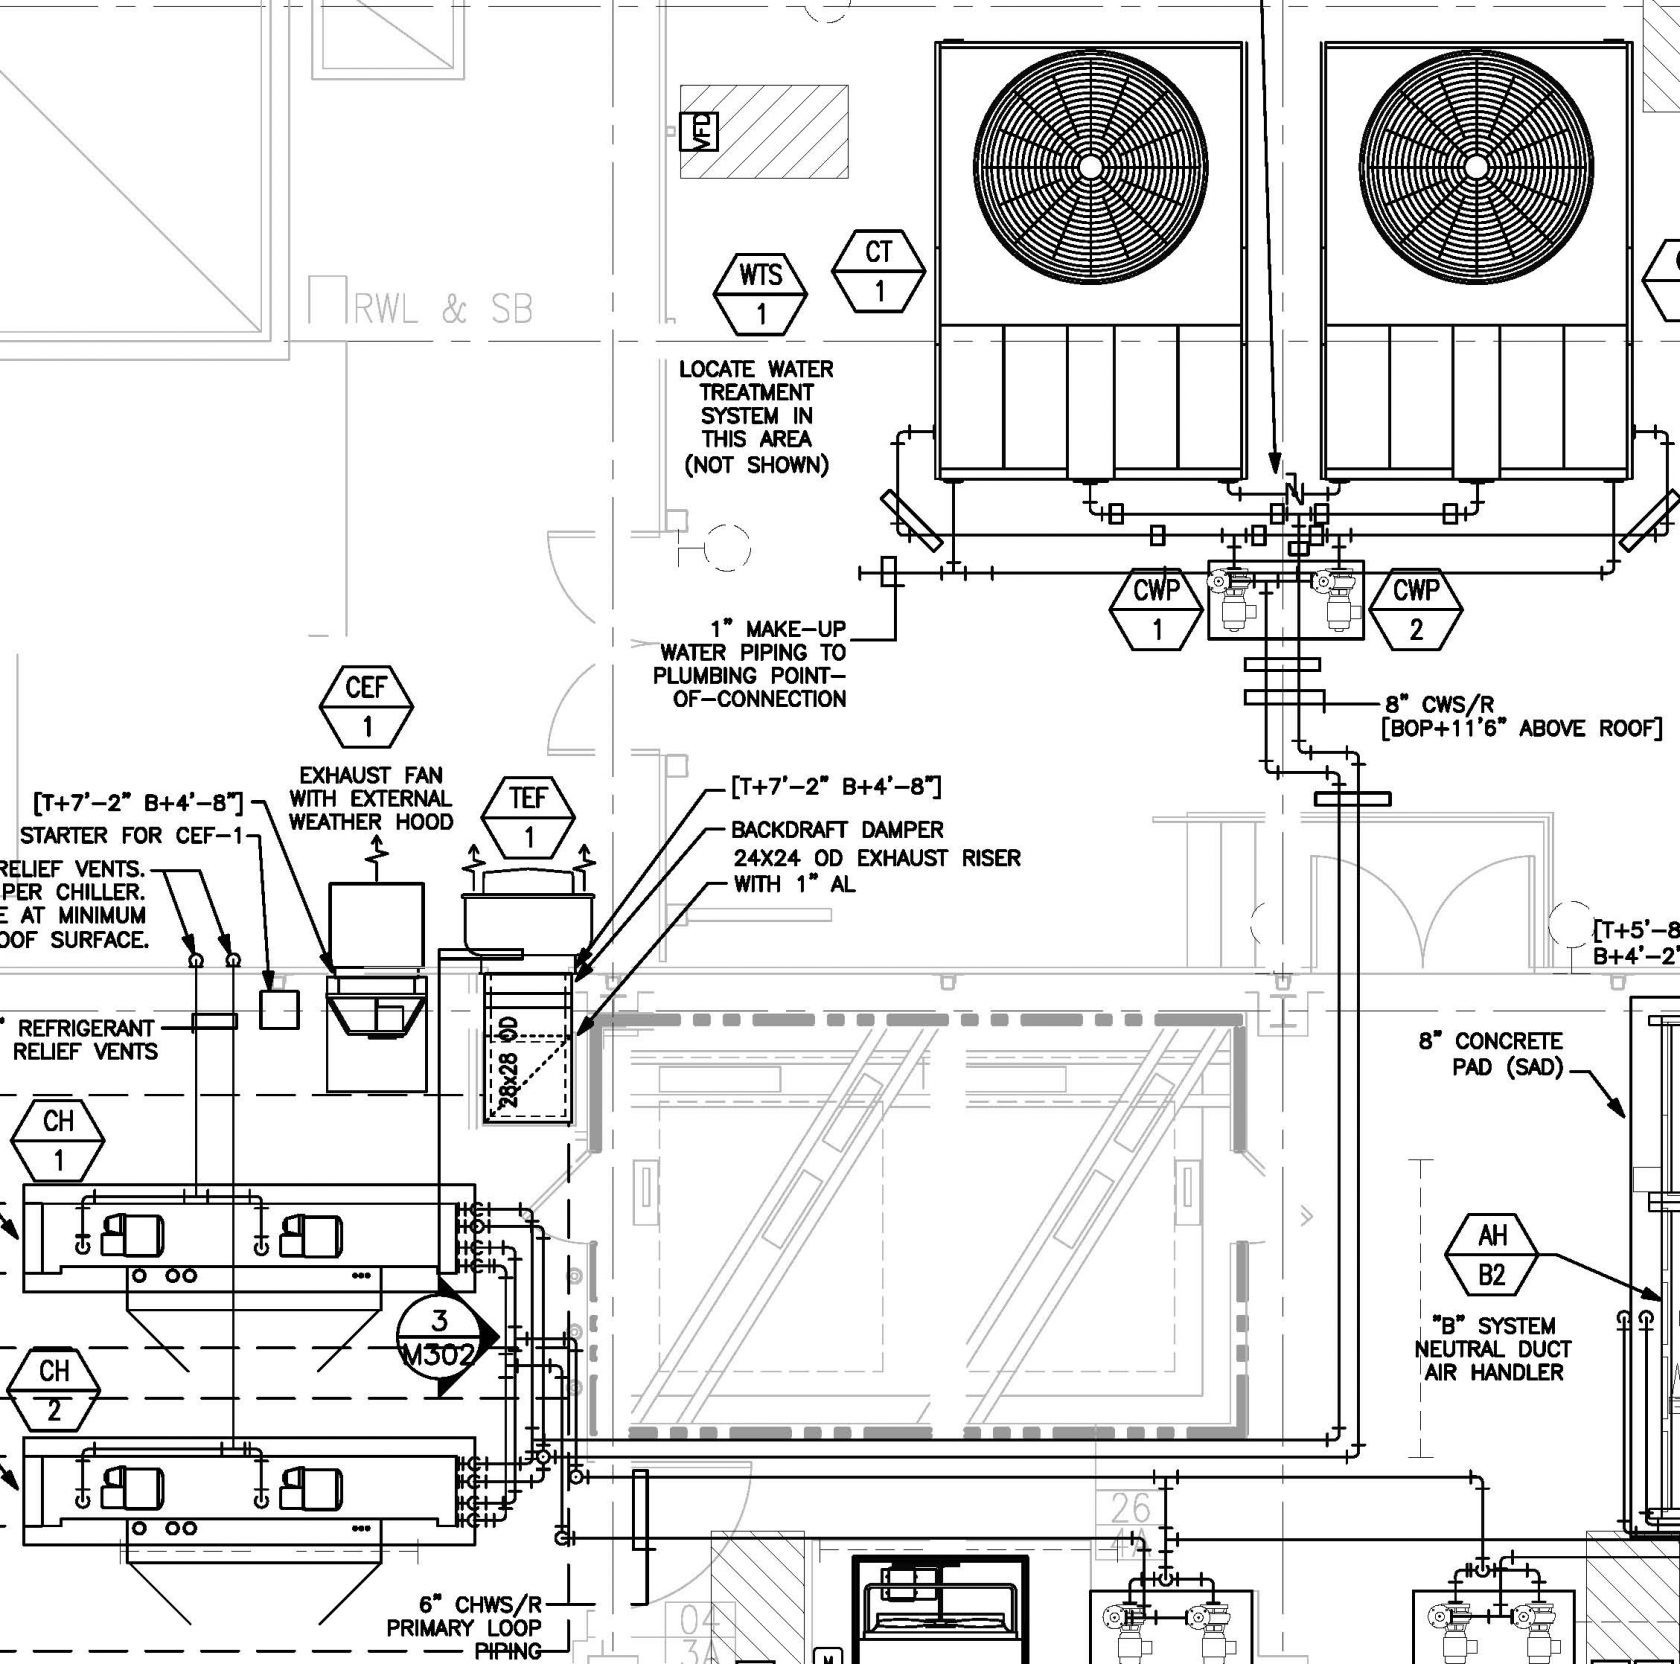 Electrical Panel Wiring Diagram Awesome Split Air Conditionering Diagram York Chiller Control Panel Wiring